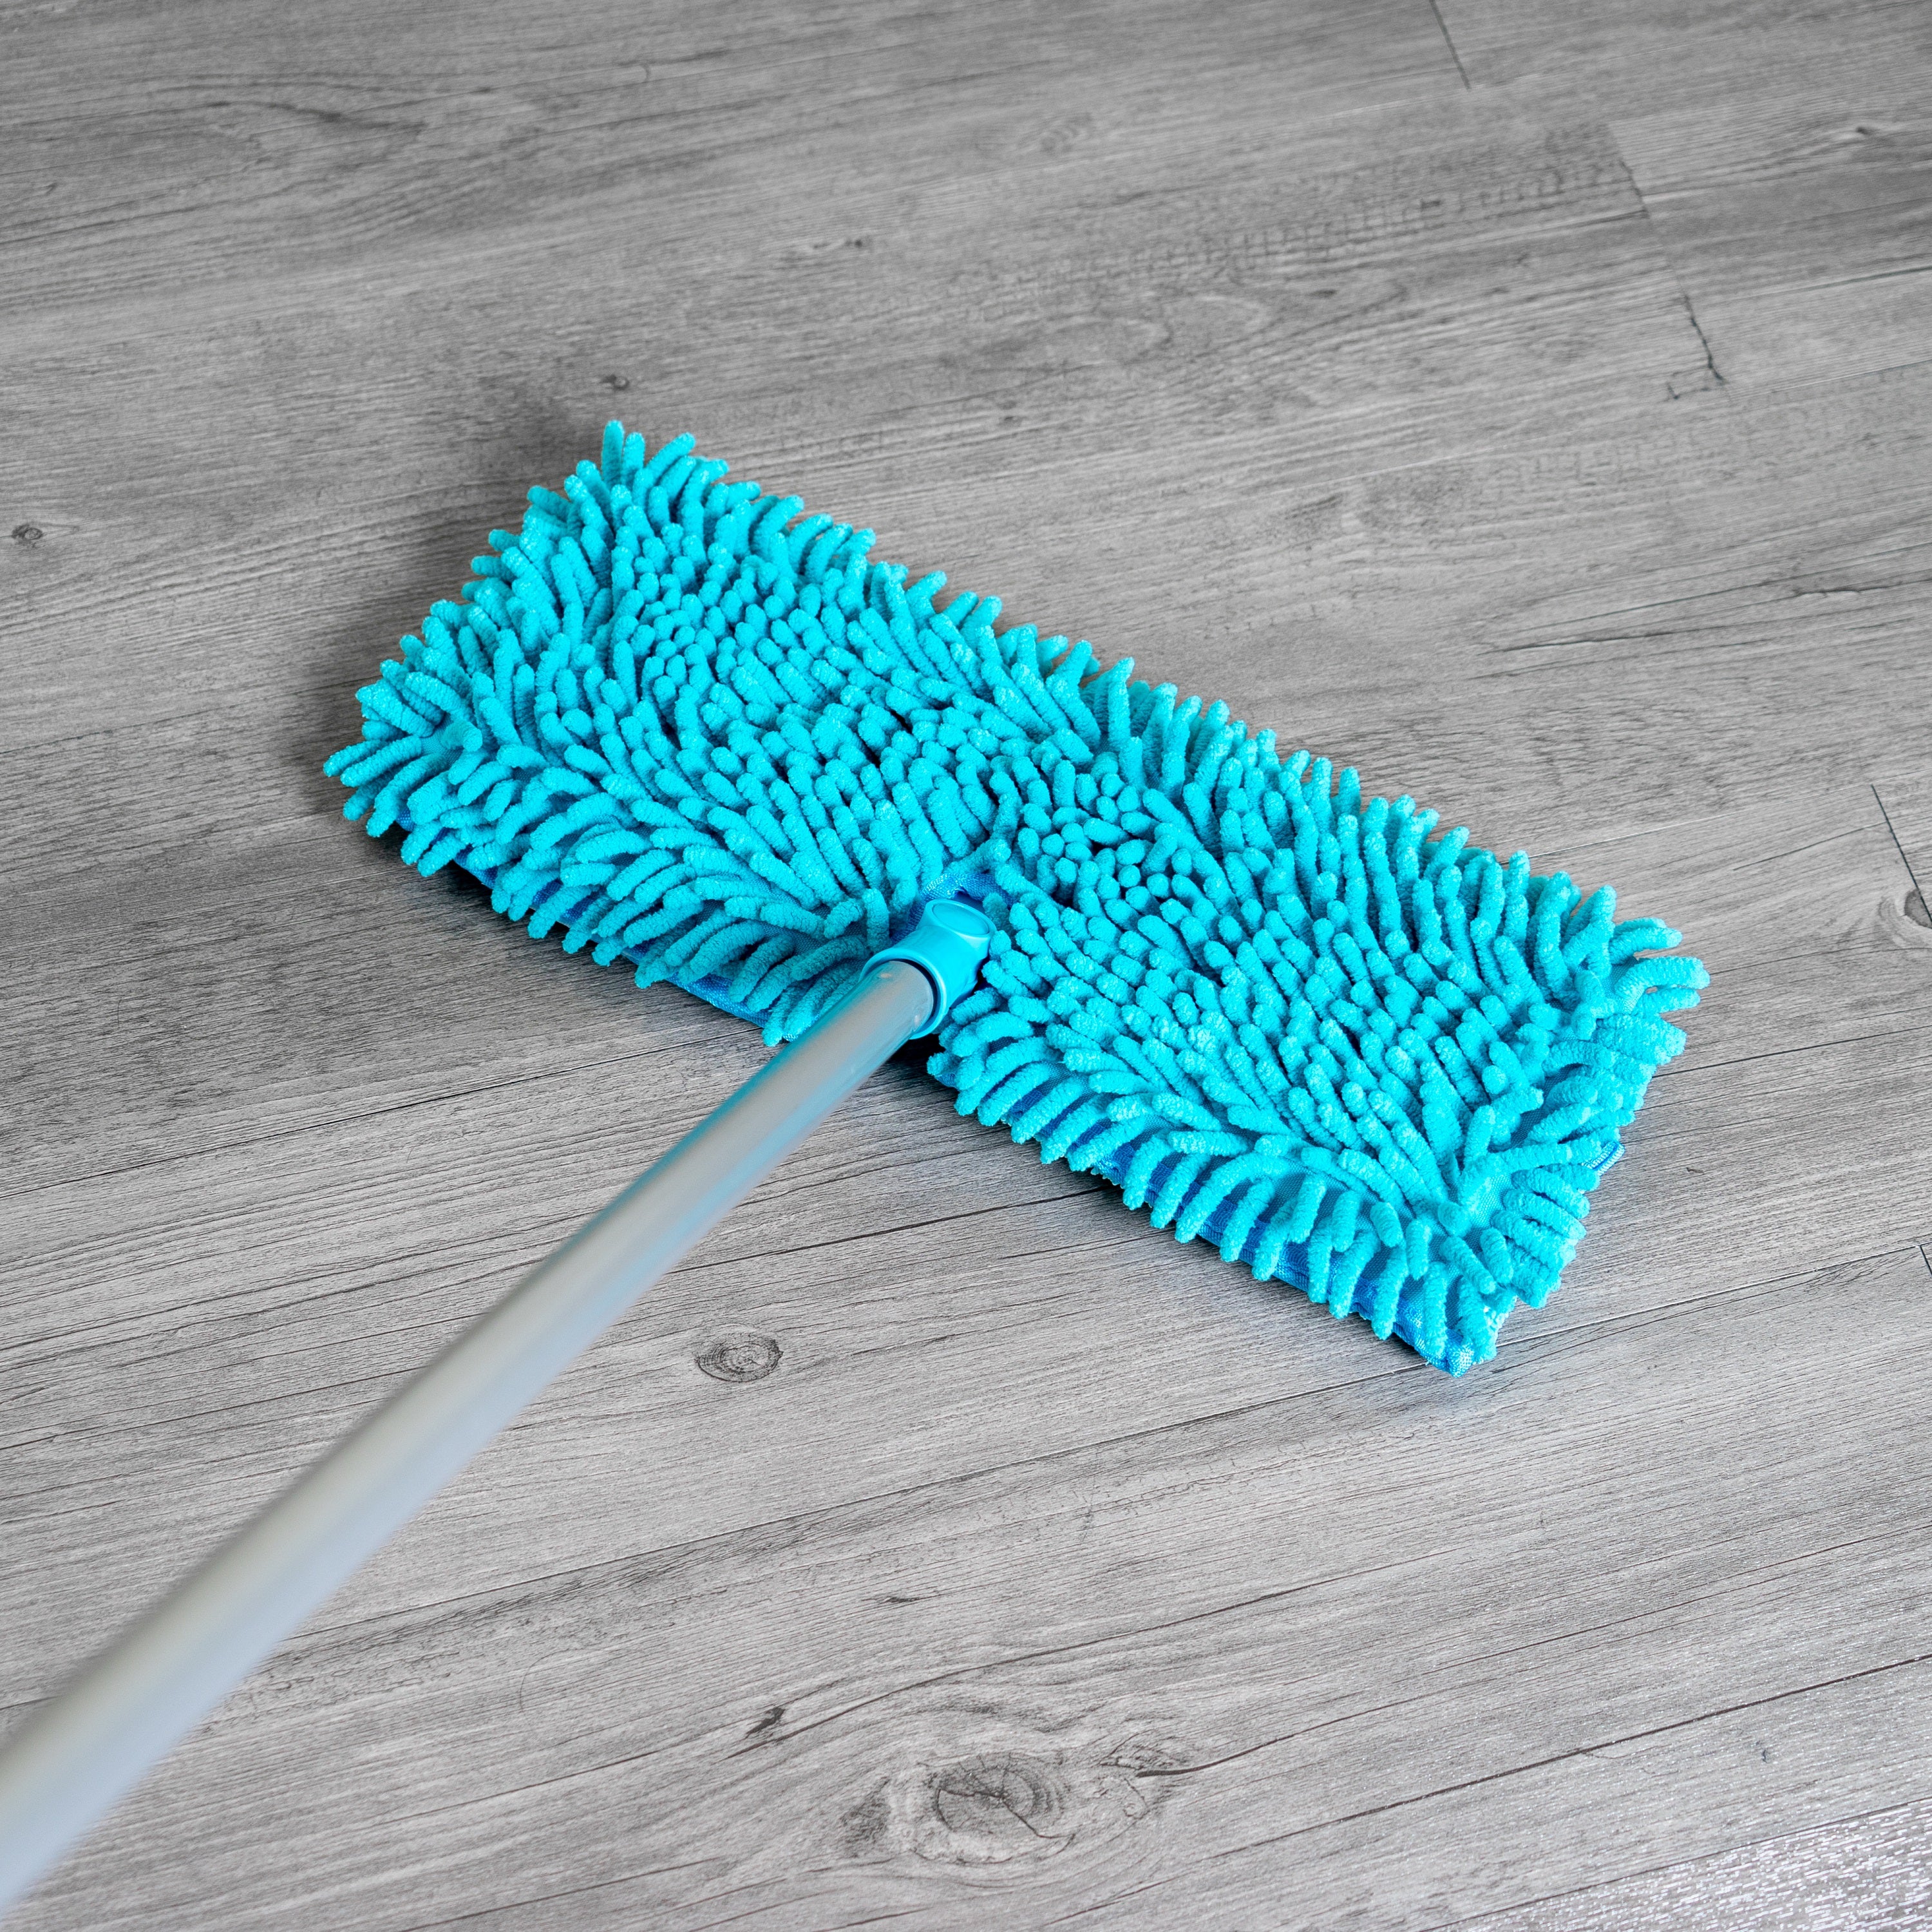 Types of Mops - Materials, Heads, Handles & More